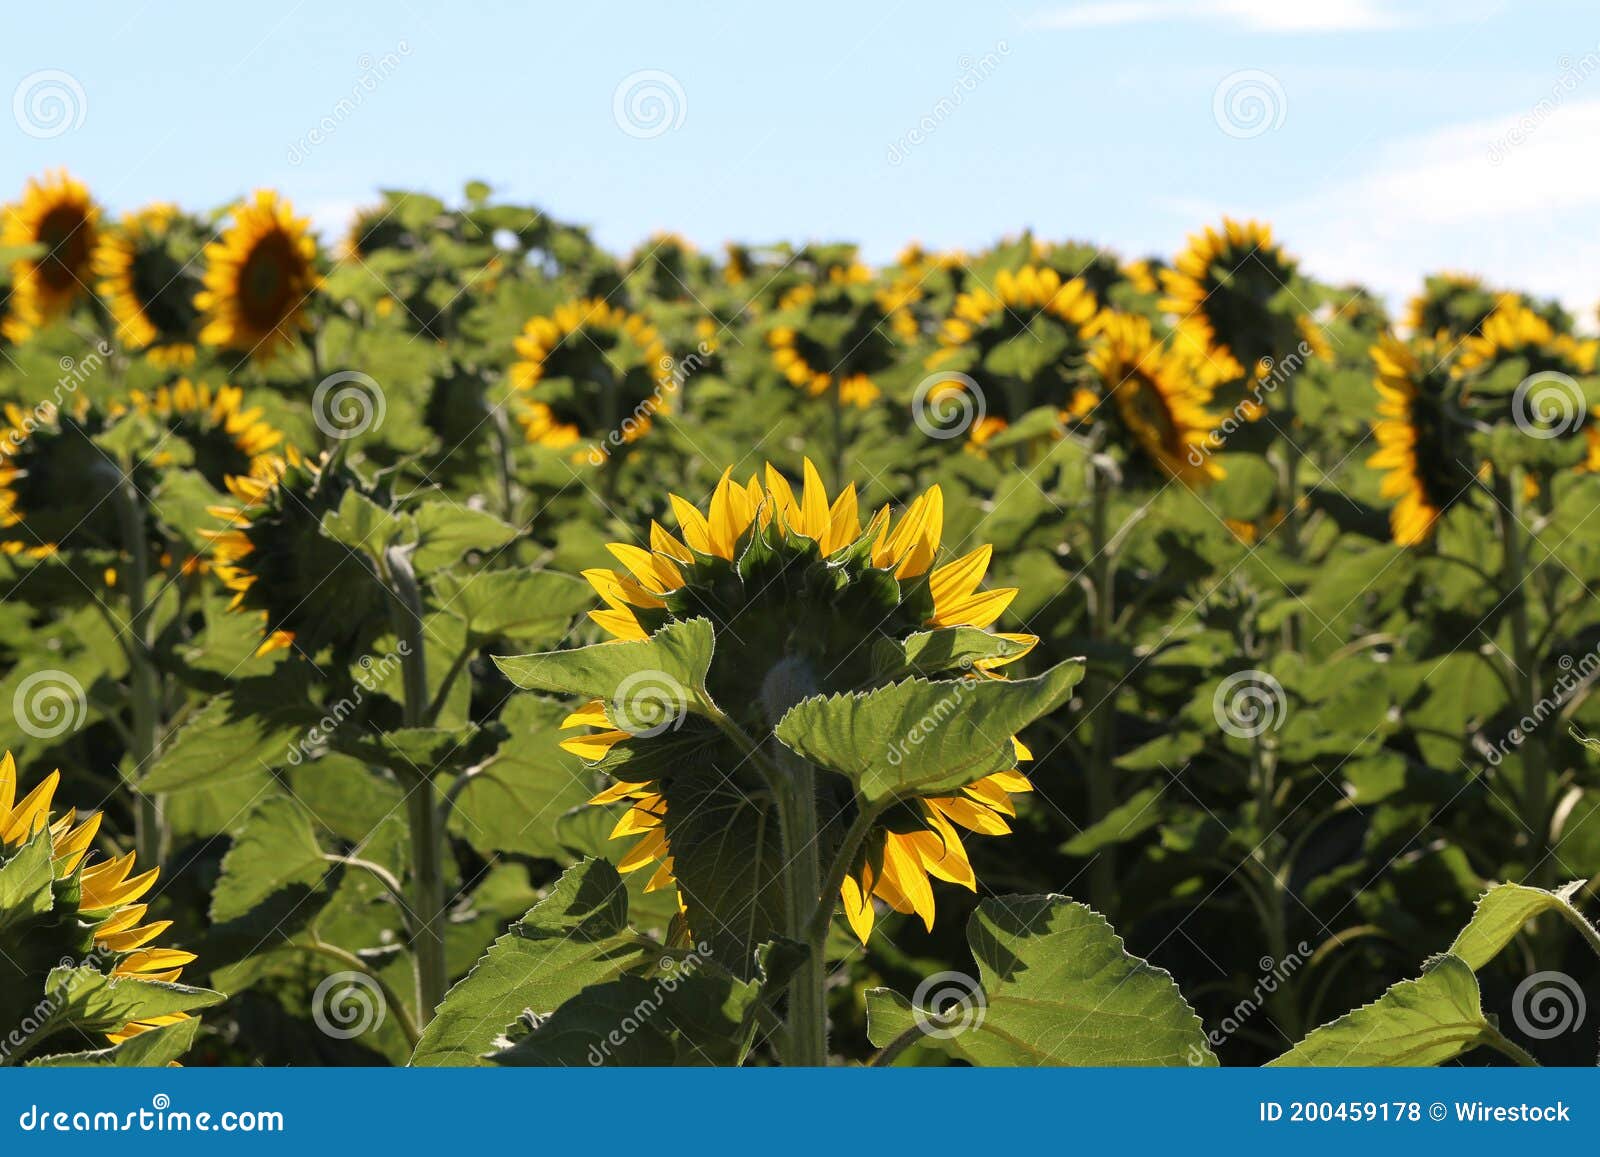 Selective Focus Closeup of a Sunflower Field with the Flowers Facing on ...